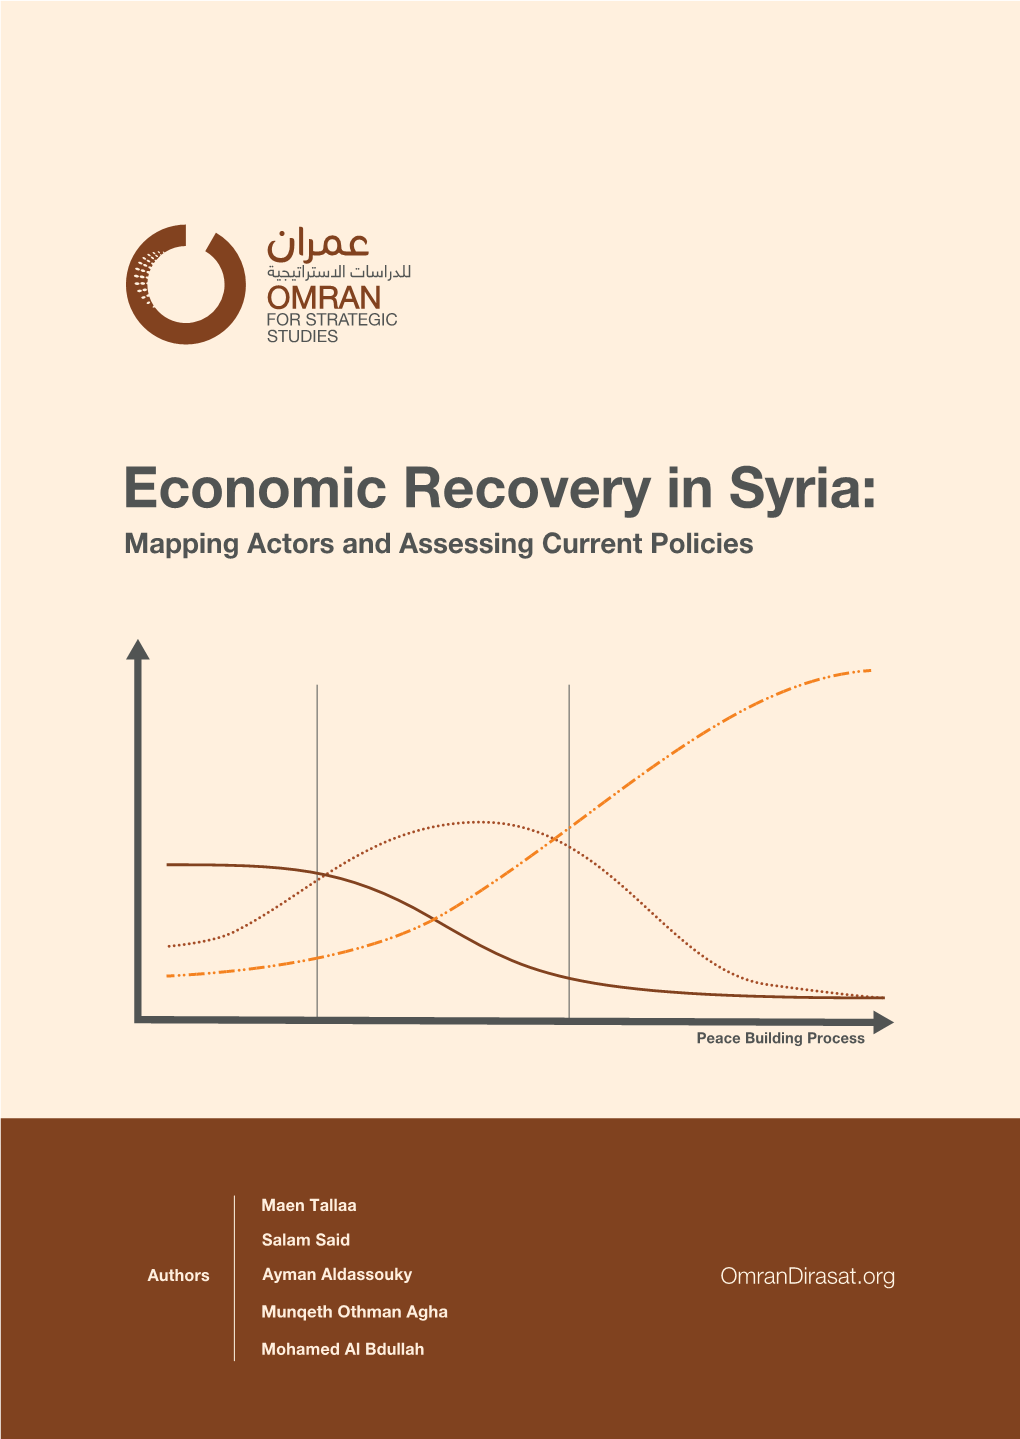 Economic Recovery in Syria: Mapping Actors and Assessing Current Policies